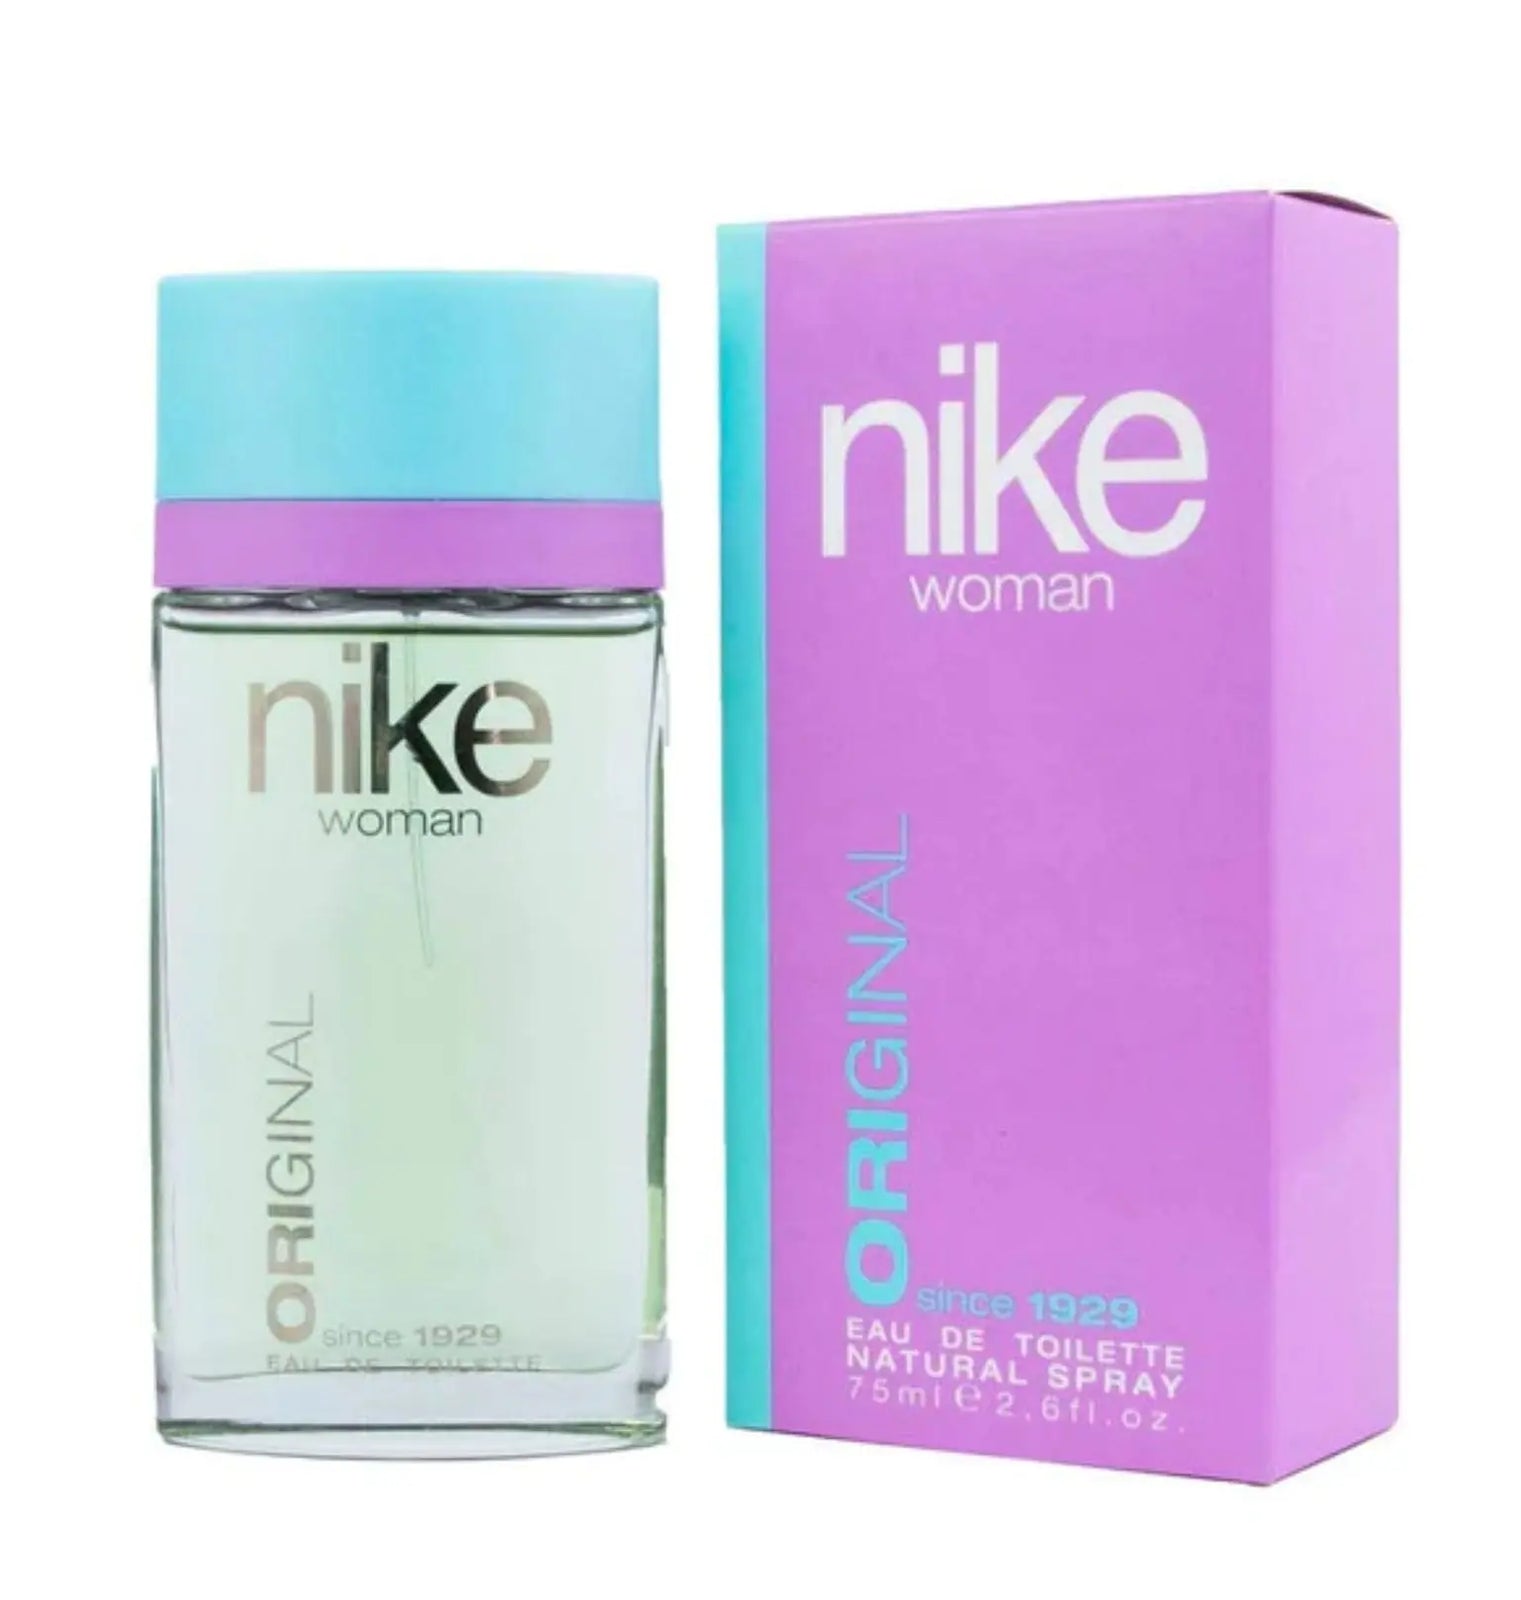 Nike Original Woman EDT Natural Spray For Women 75ml Imported Perfumes & Beauty Store